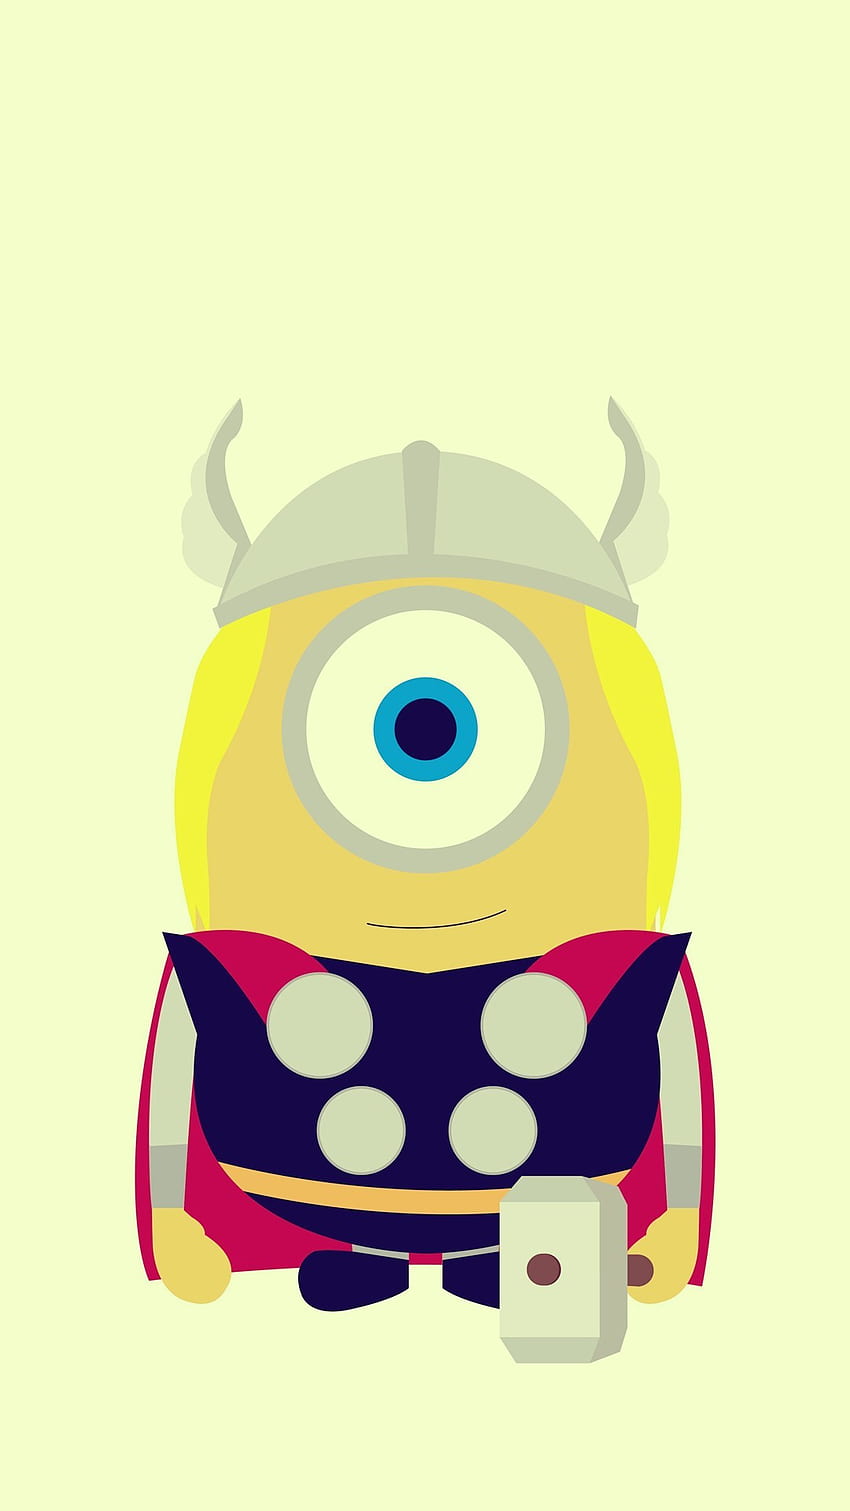 Funny Thor Minion Avengers iphone 6 plus - 2014 Halloween, Despicable Me HD phone wallpaper